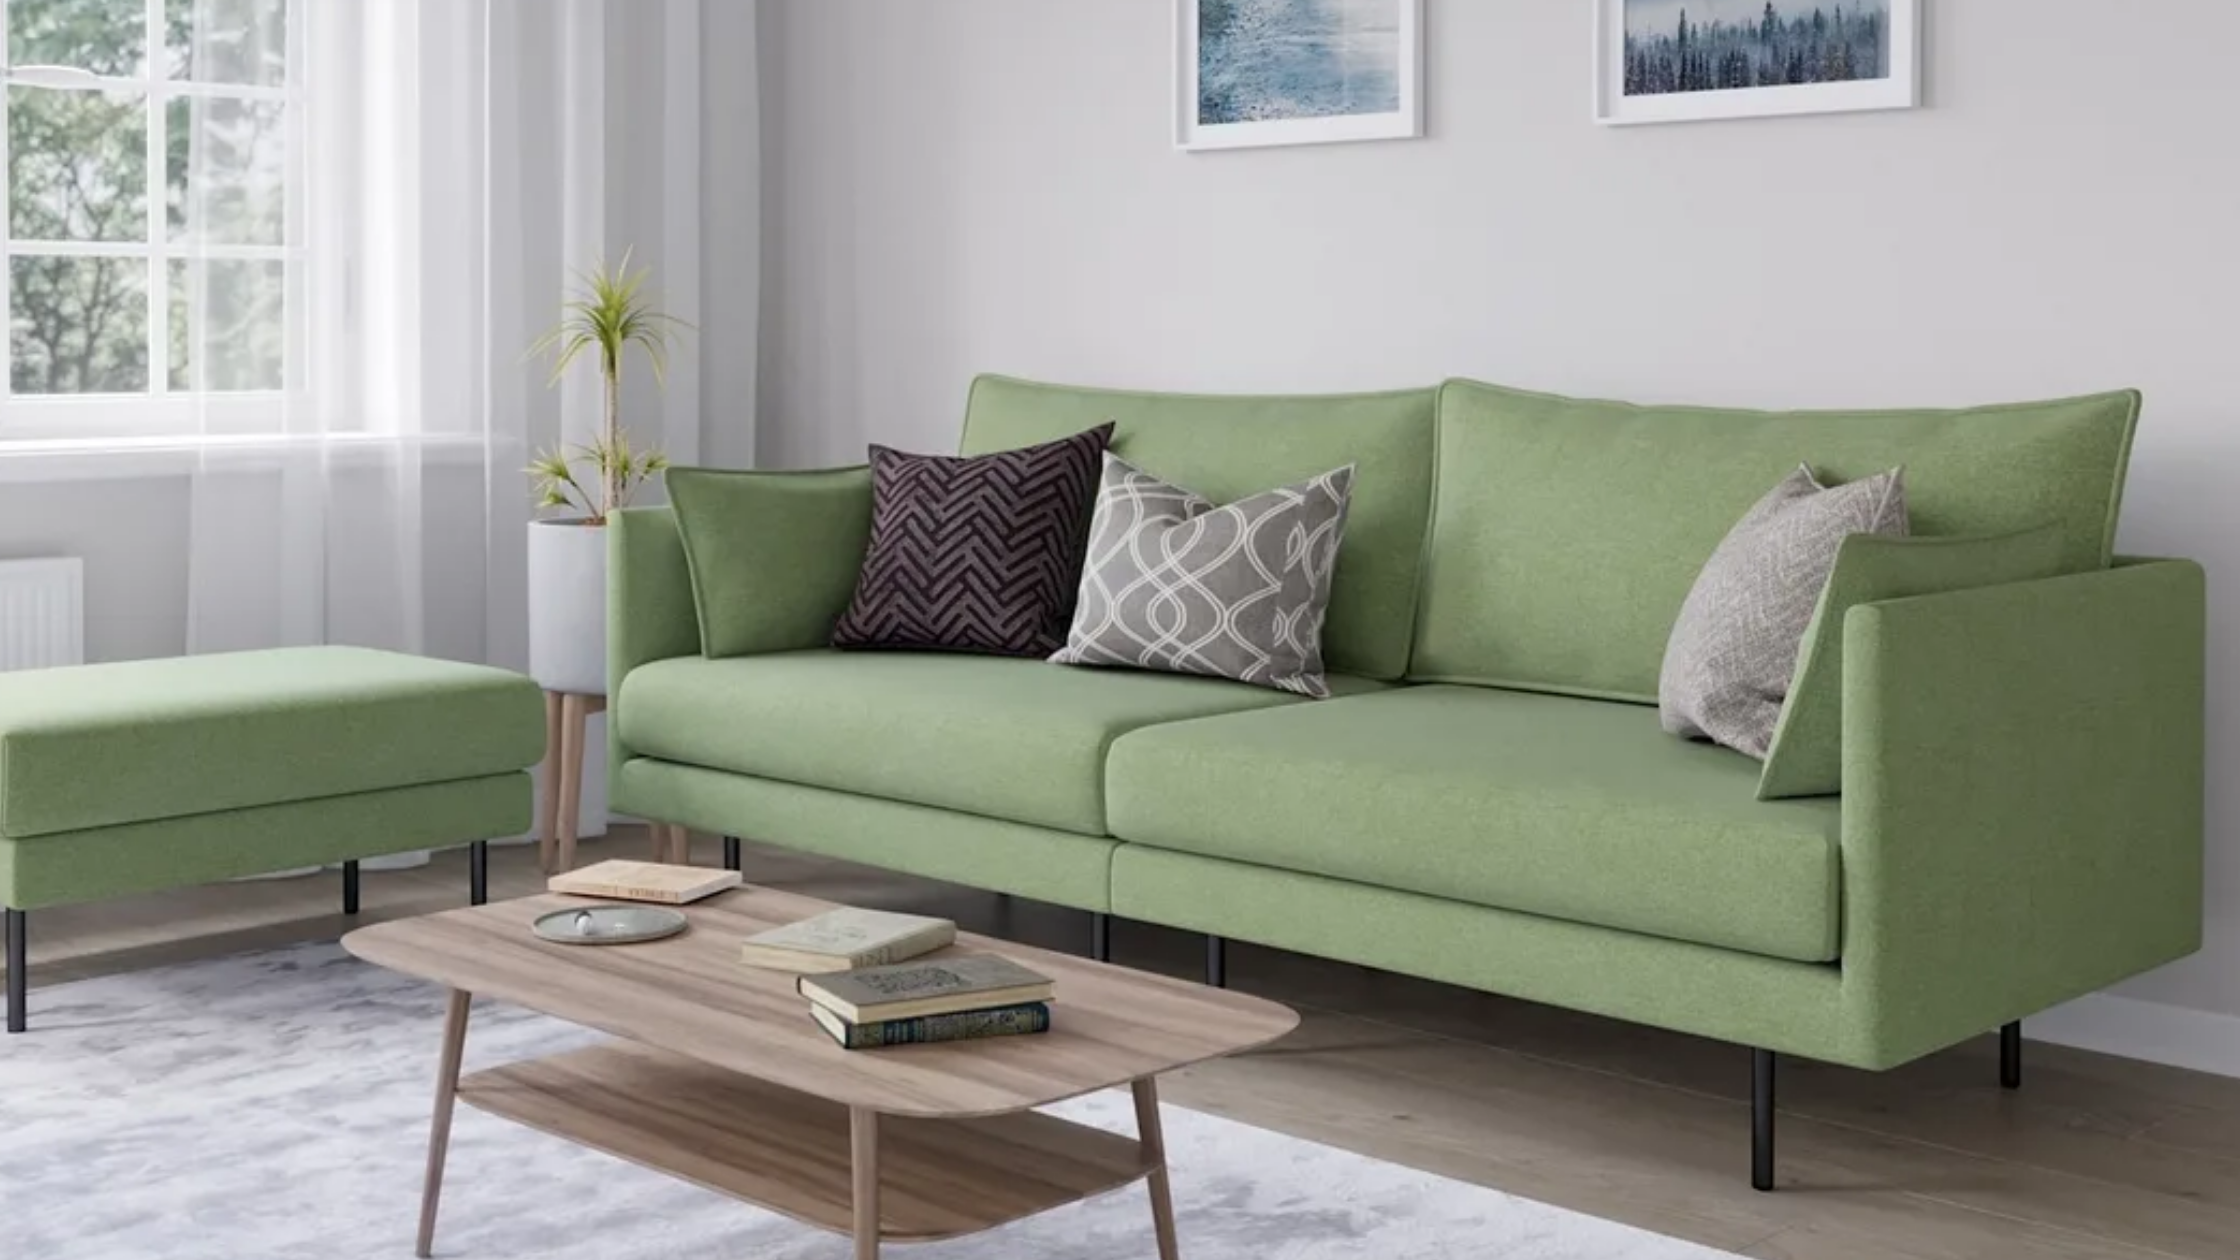 Clean Suede Sofa - The Happy House Cleaning